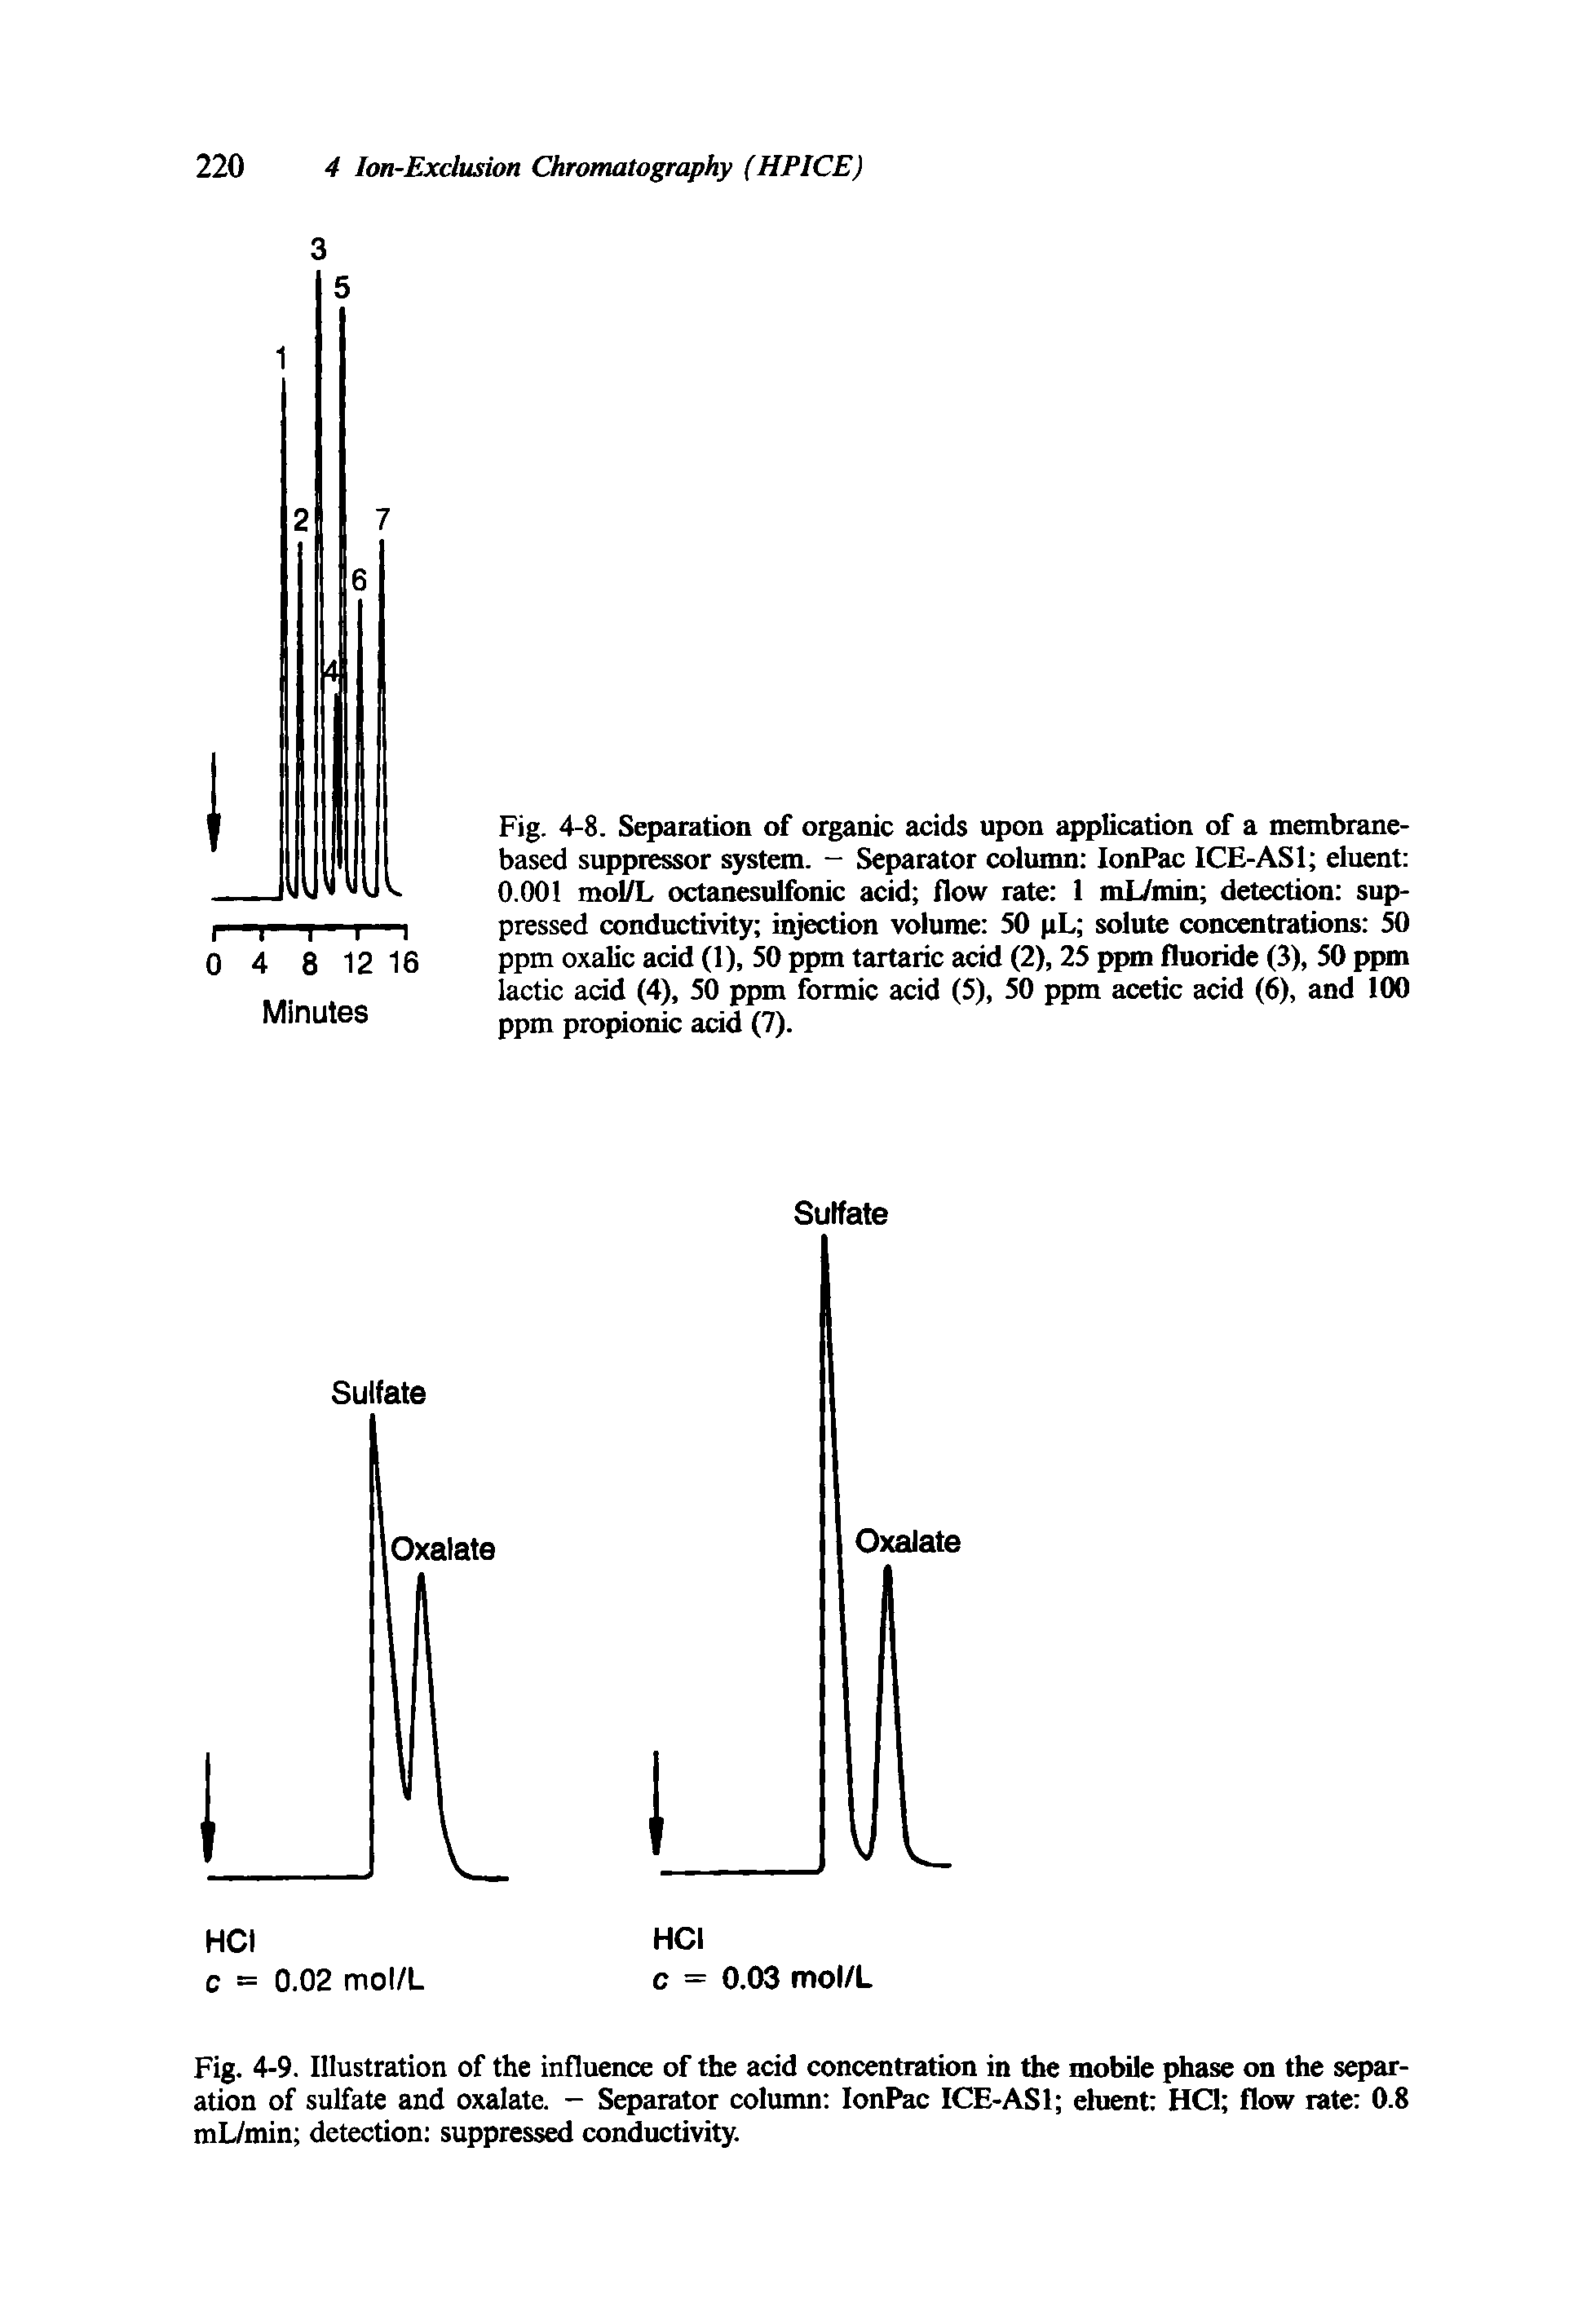 Fig. 4-9. Illustration of the influence of the acid concentration in the mobile phase on the separation of sulfate and oxalate. - Separator column IonPac ICE-AS1 eluent HCI flow rate 0.8 mL/min detection suppressed conductivity.